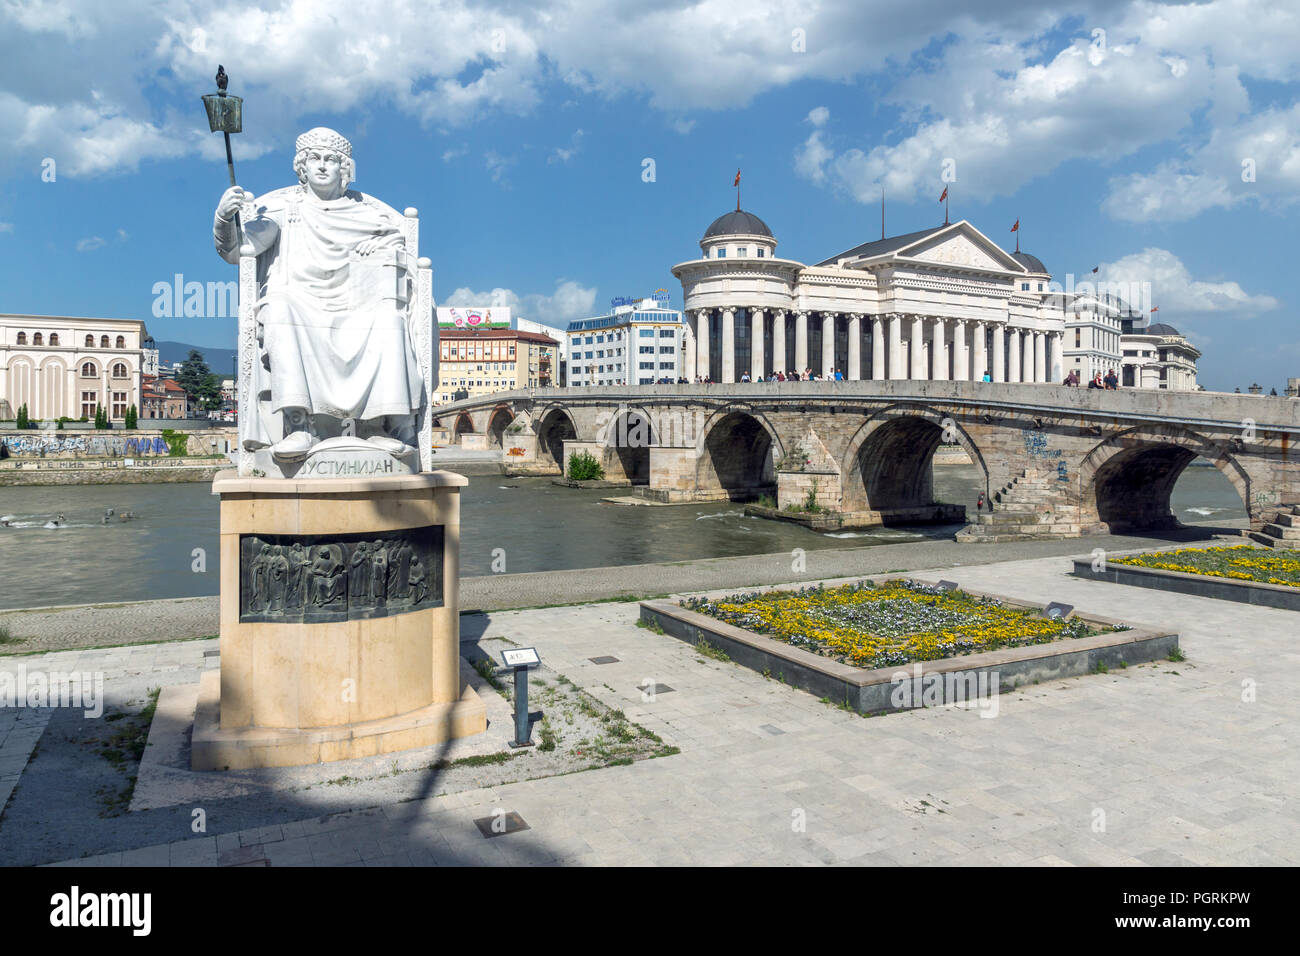 SKOPJE, REPUBLIC MACEDONIA - 13 MAY 2017: Justinian I Monument and Alexander the Great square in Skopje, of Macedonia Stock Photo - Alamy